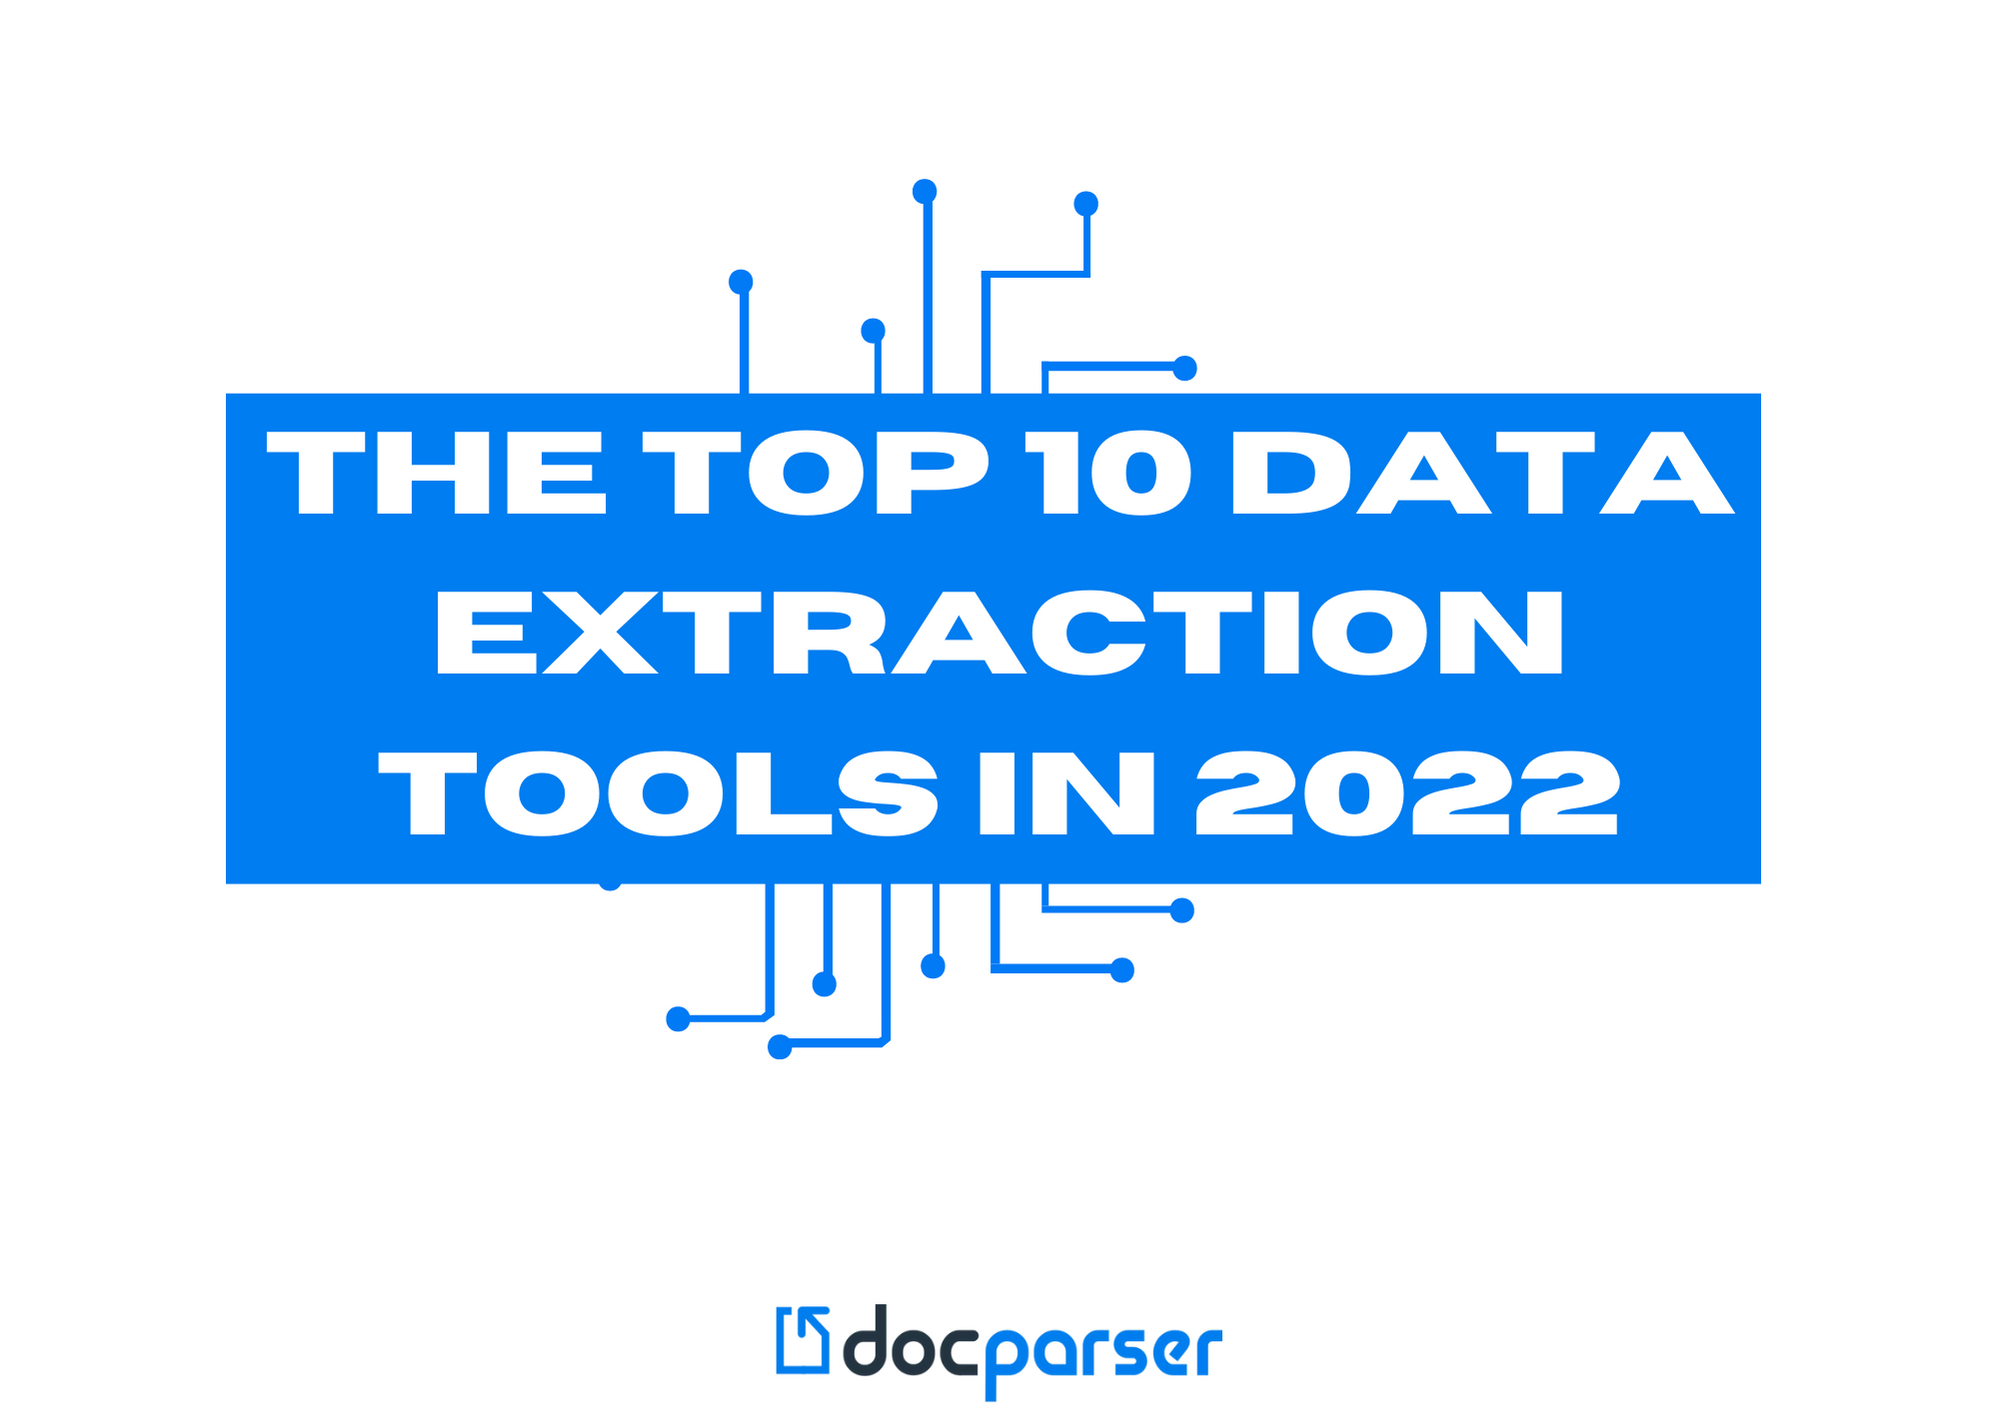 The Top 10 Data Extraction Tools in 2022 - Best Data Extraction Software